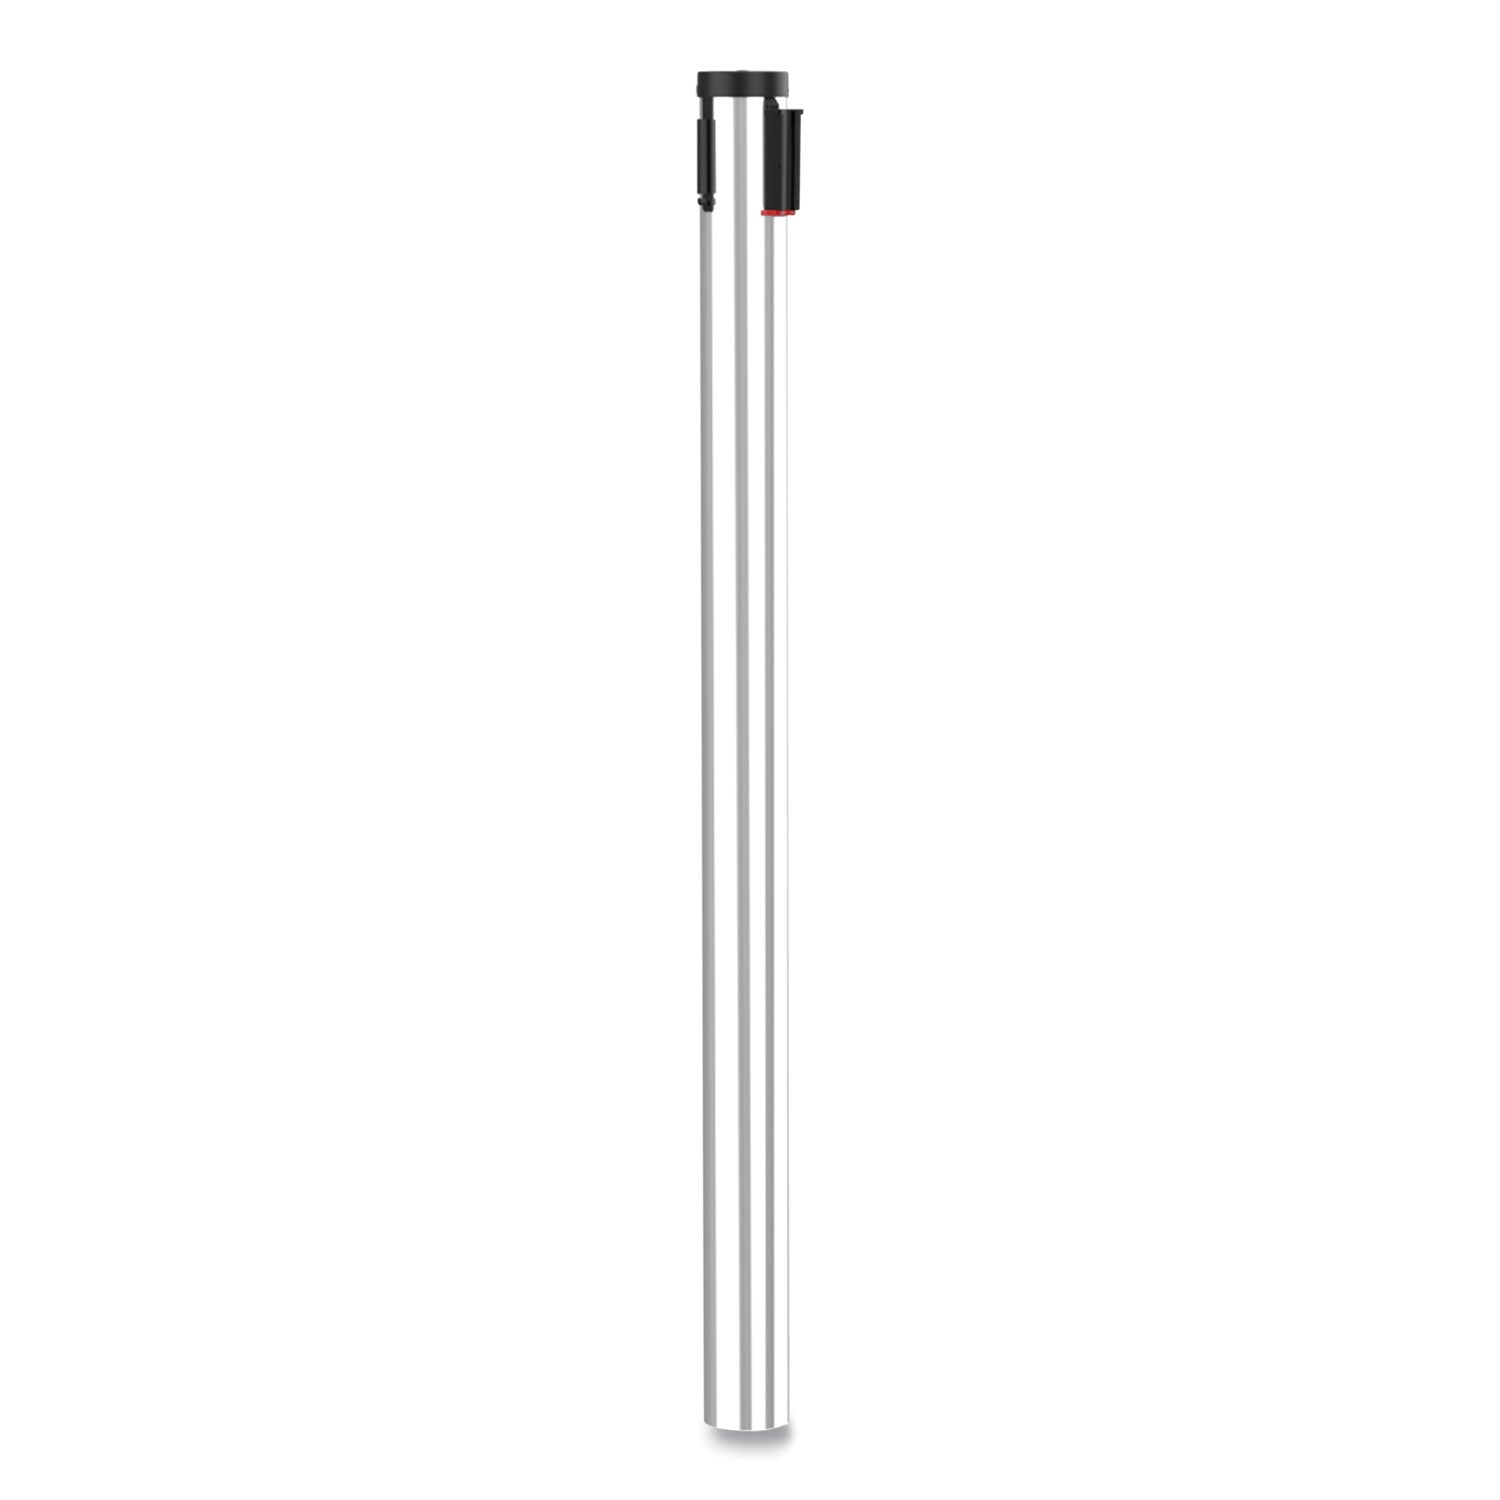 Adjusta-Tape Crowd Control Stanchion Posts Only, Polished Aluminum, 40" High, Silver, 2/Box - 